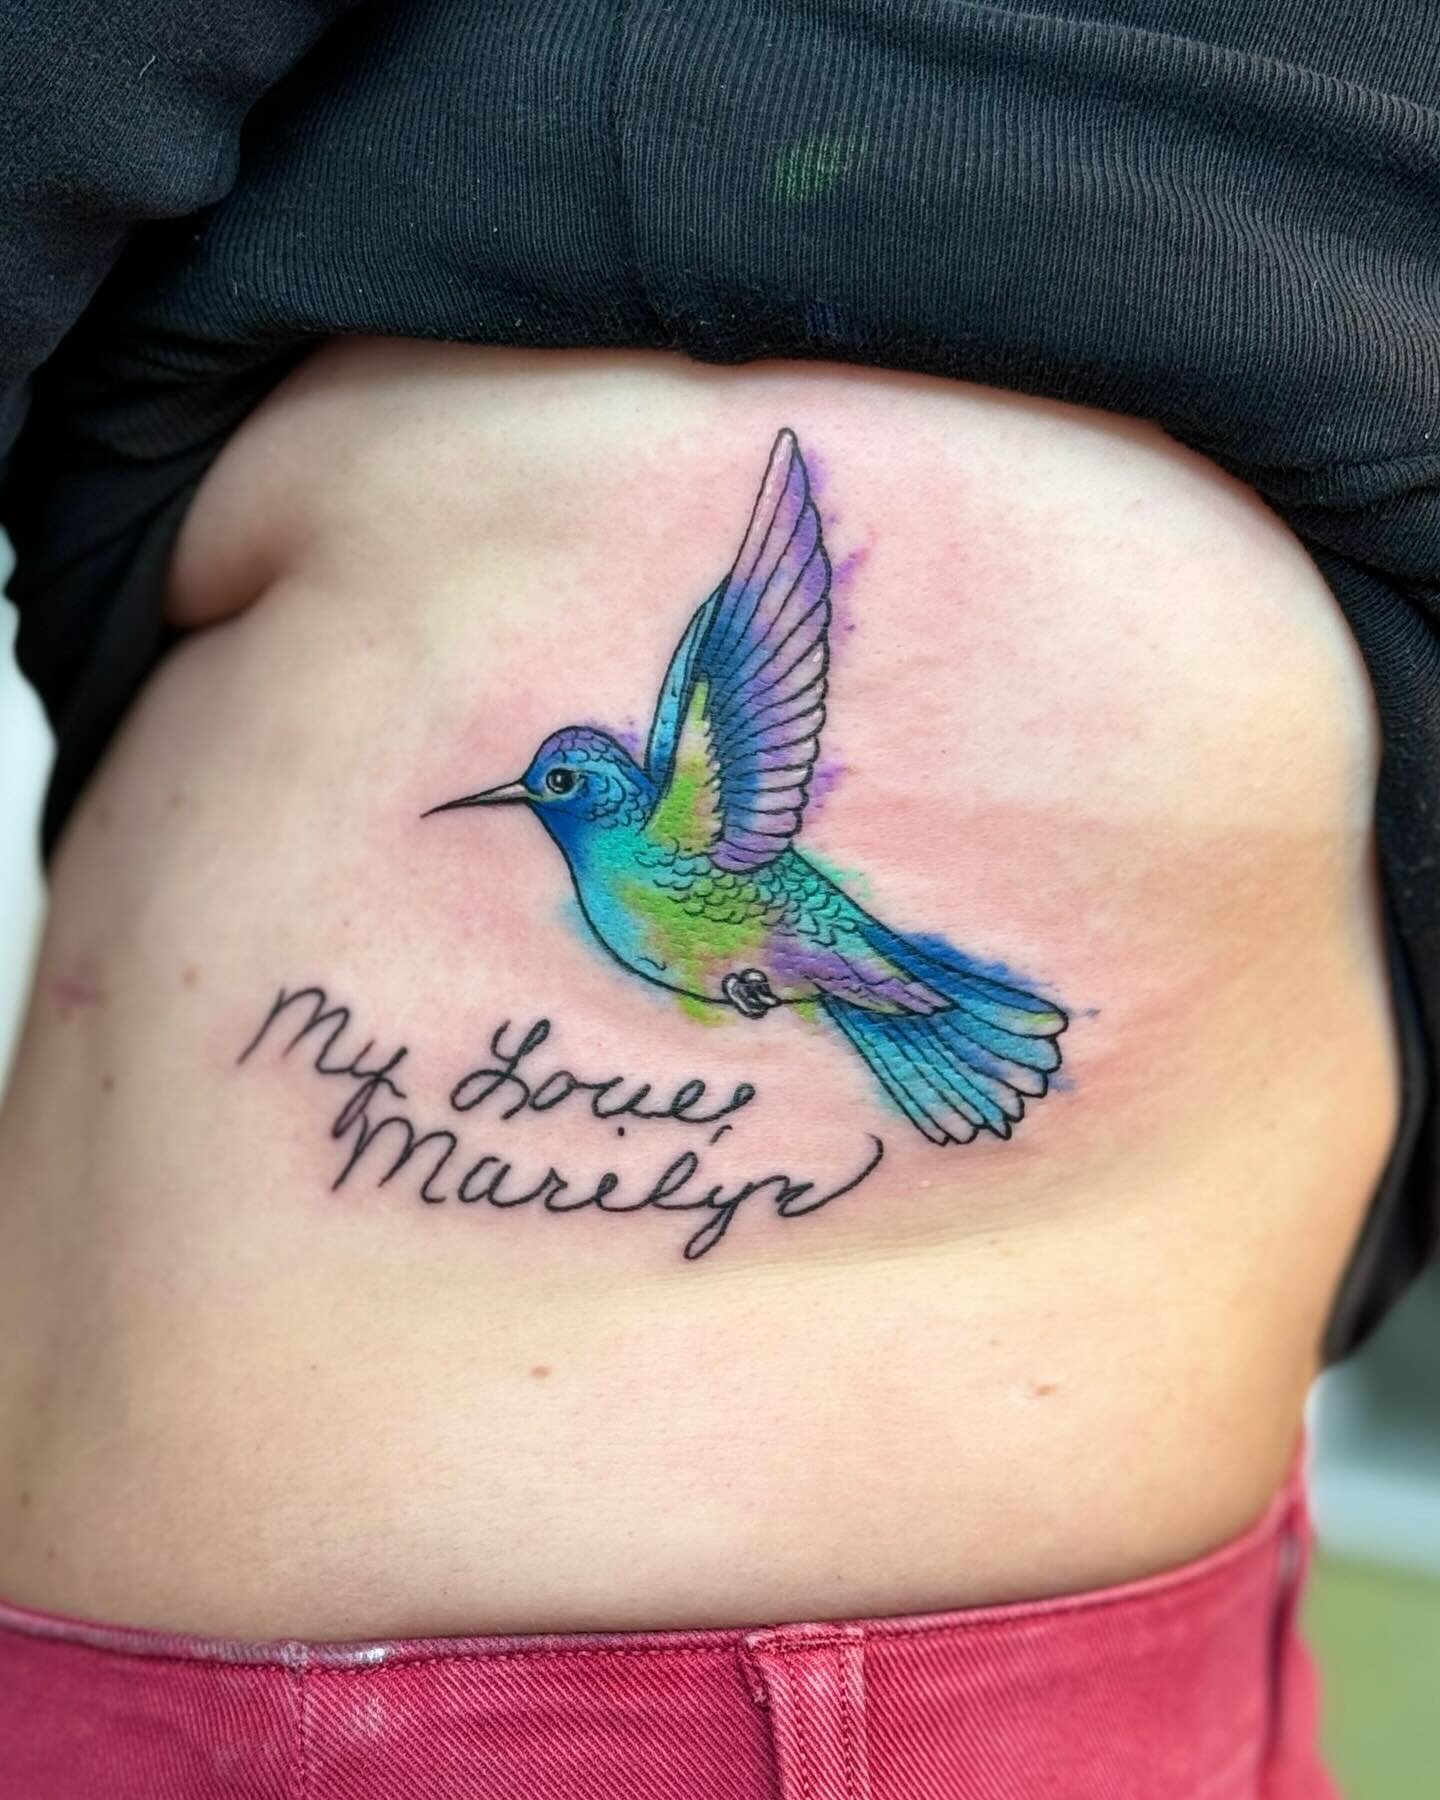 Forever in my heart, forever on my skin ✨

Watercolor hummingbird tribute for my client&rsquo;s aunt with her handwriting. I&rsquo;m always honored to do these sentimental projects &amp; hope they bring peace and comfort. @m.e.spalding 

#watercolor 